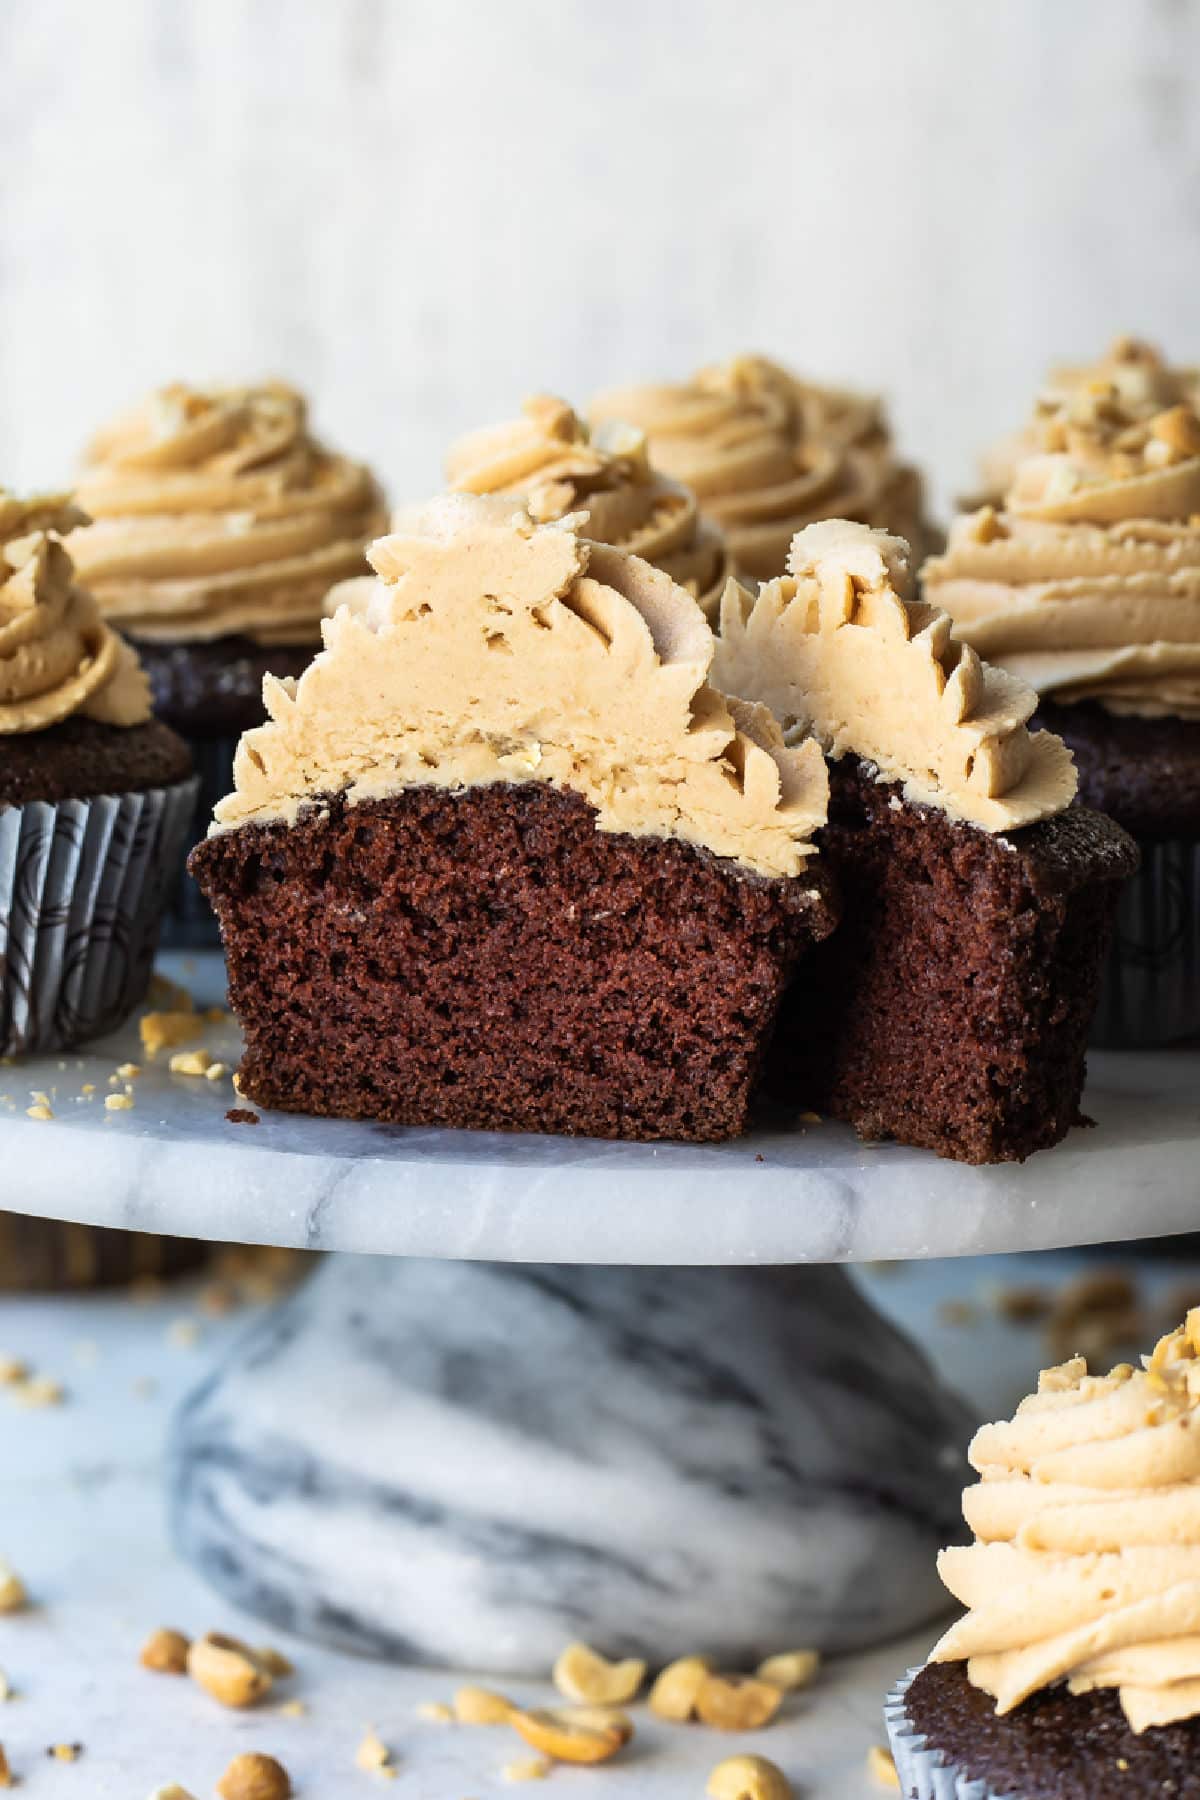 A cake stand filled with chocolate cupcakes with peanut butter frosting, 1 cut open to show the inside.